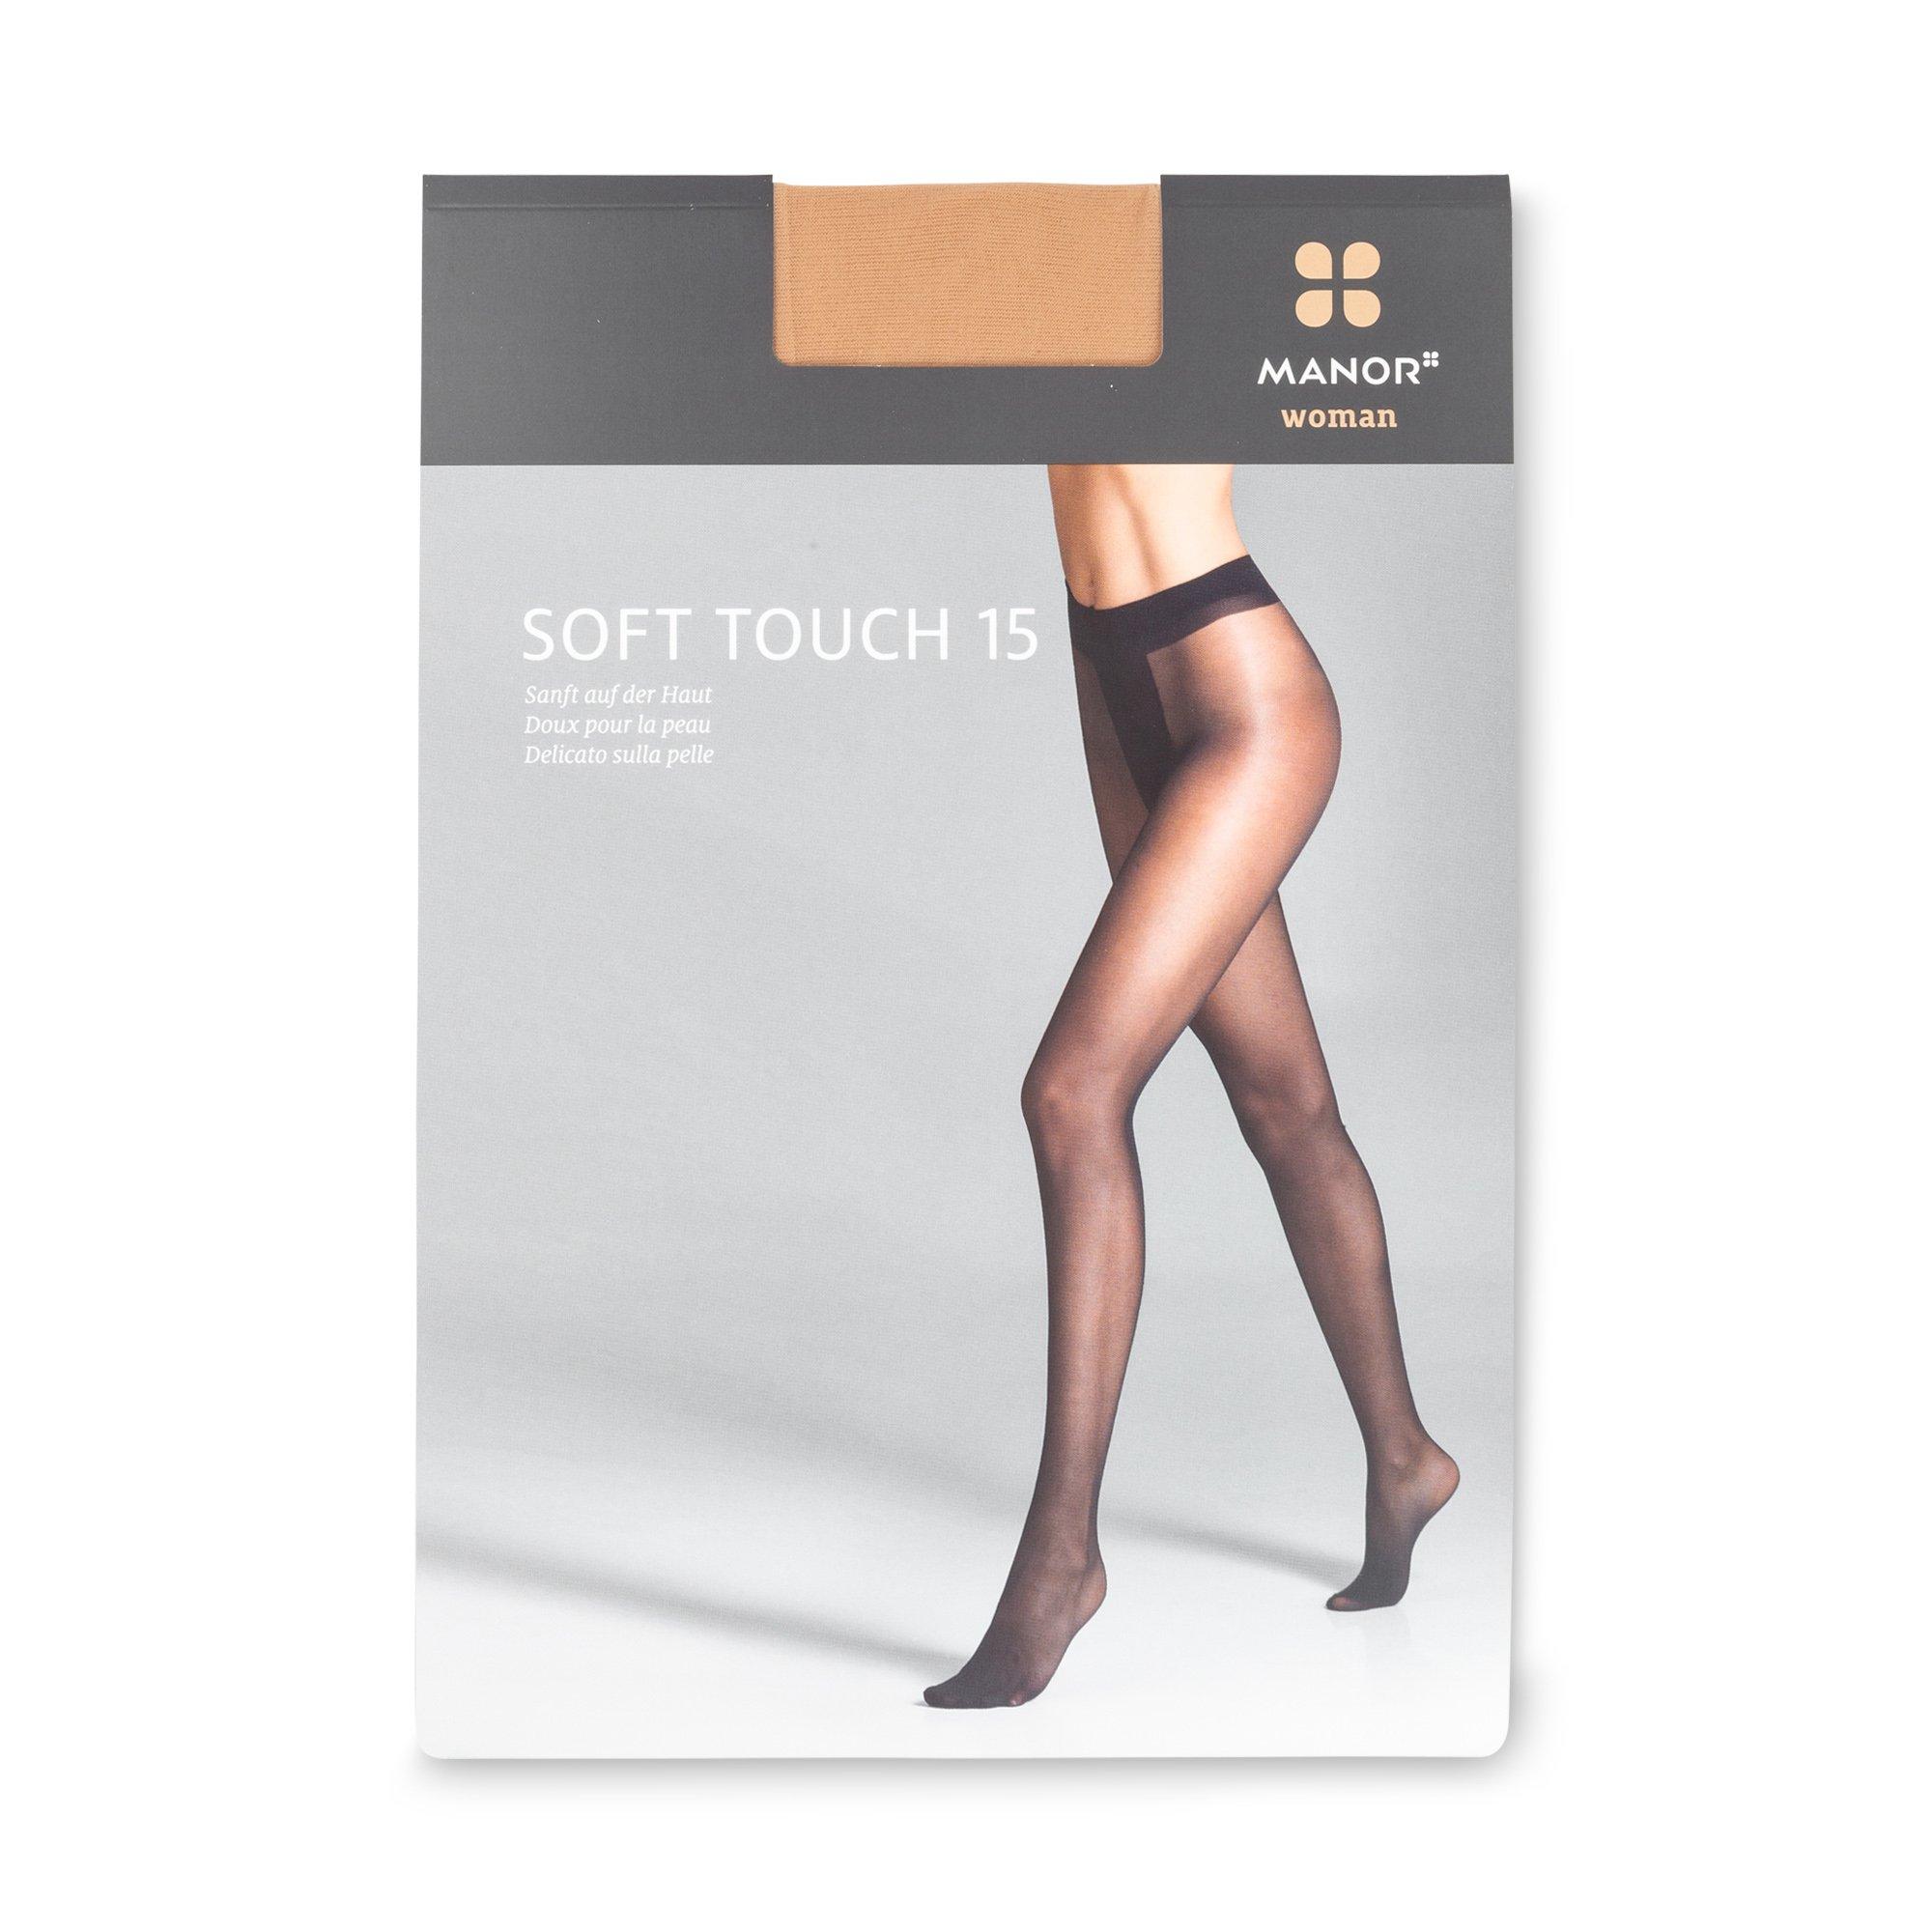 Manor Woman Soft Touch 15 Collant, 15 Den 